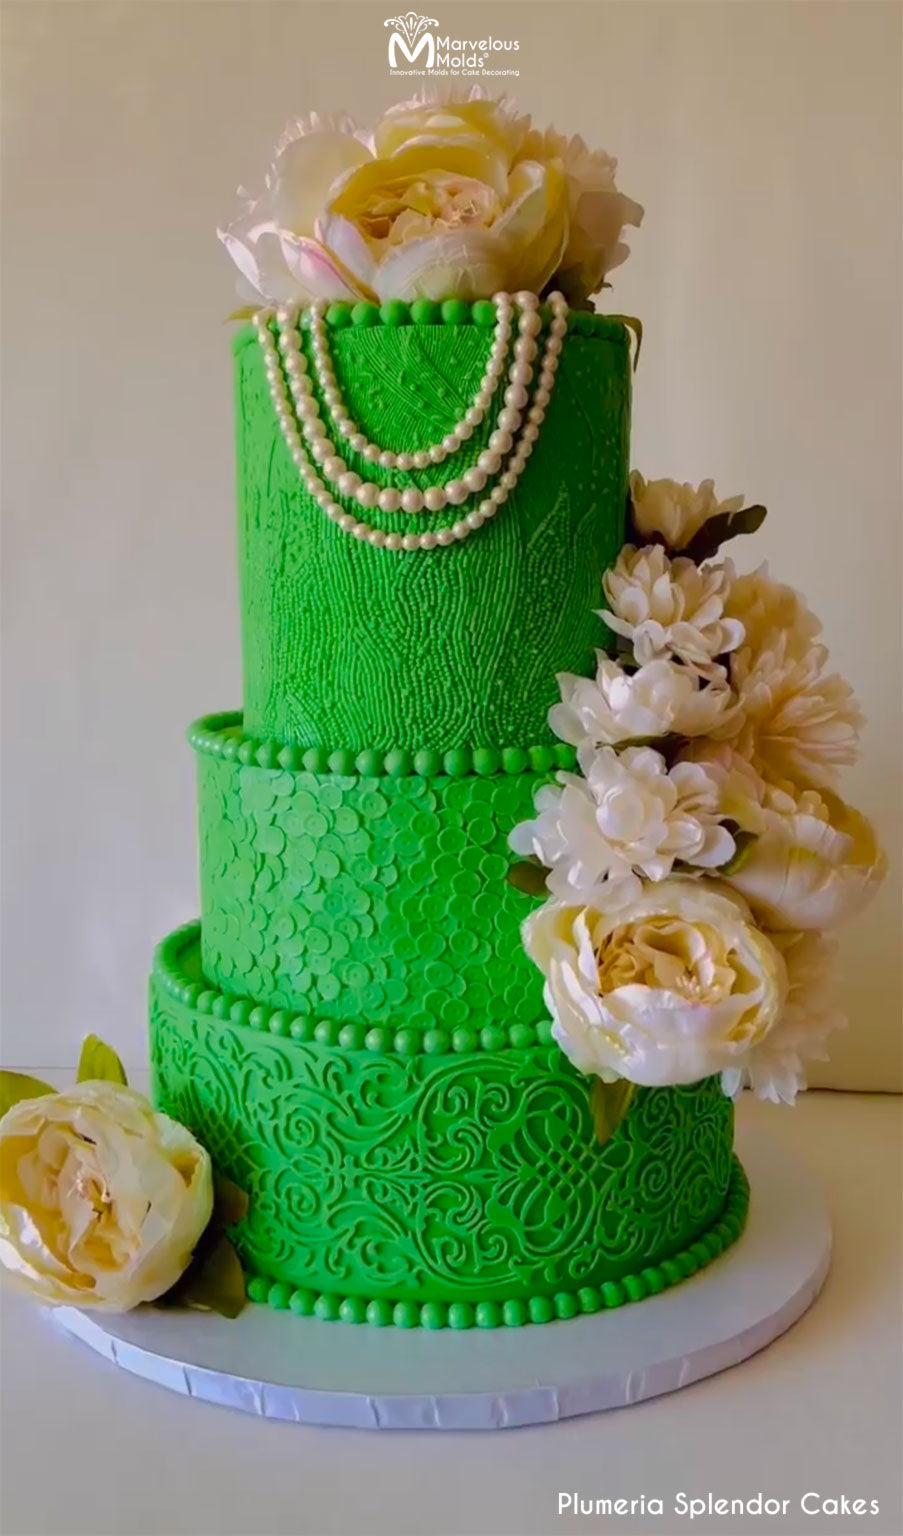 All Green Jackie Kennedy Themed Pearl Cake, Decorated with Marvelous Molds PinchPro Silicone Pearl Mold 10mm